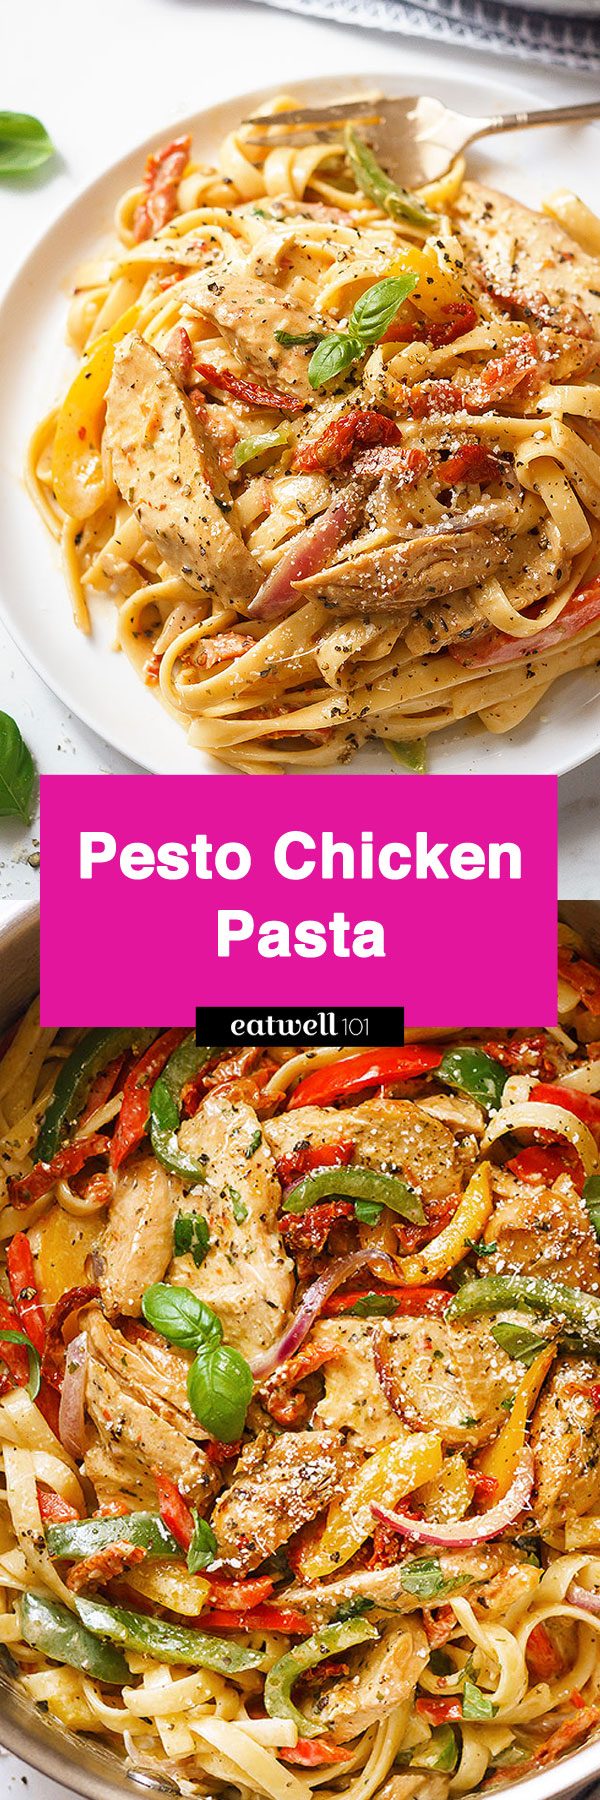 Chicken Pasta in Creamy Pesto Sun-Dried Tomato Sauce - #pasta #pesto #chicken #recipe #eatwell101 -  A restaurant-style meal, packed with flavor and ready in 30 minutes.